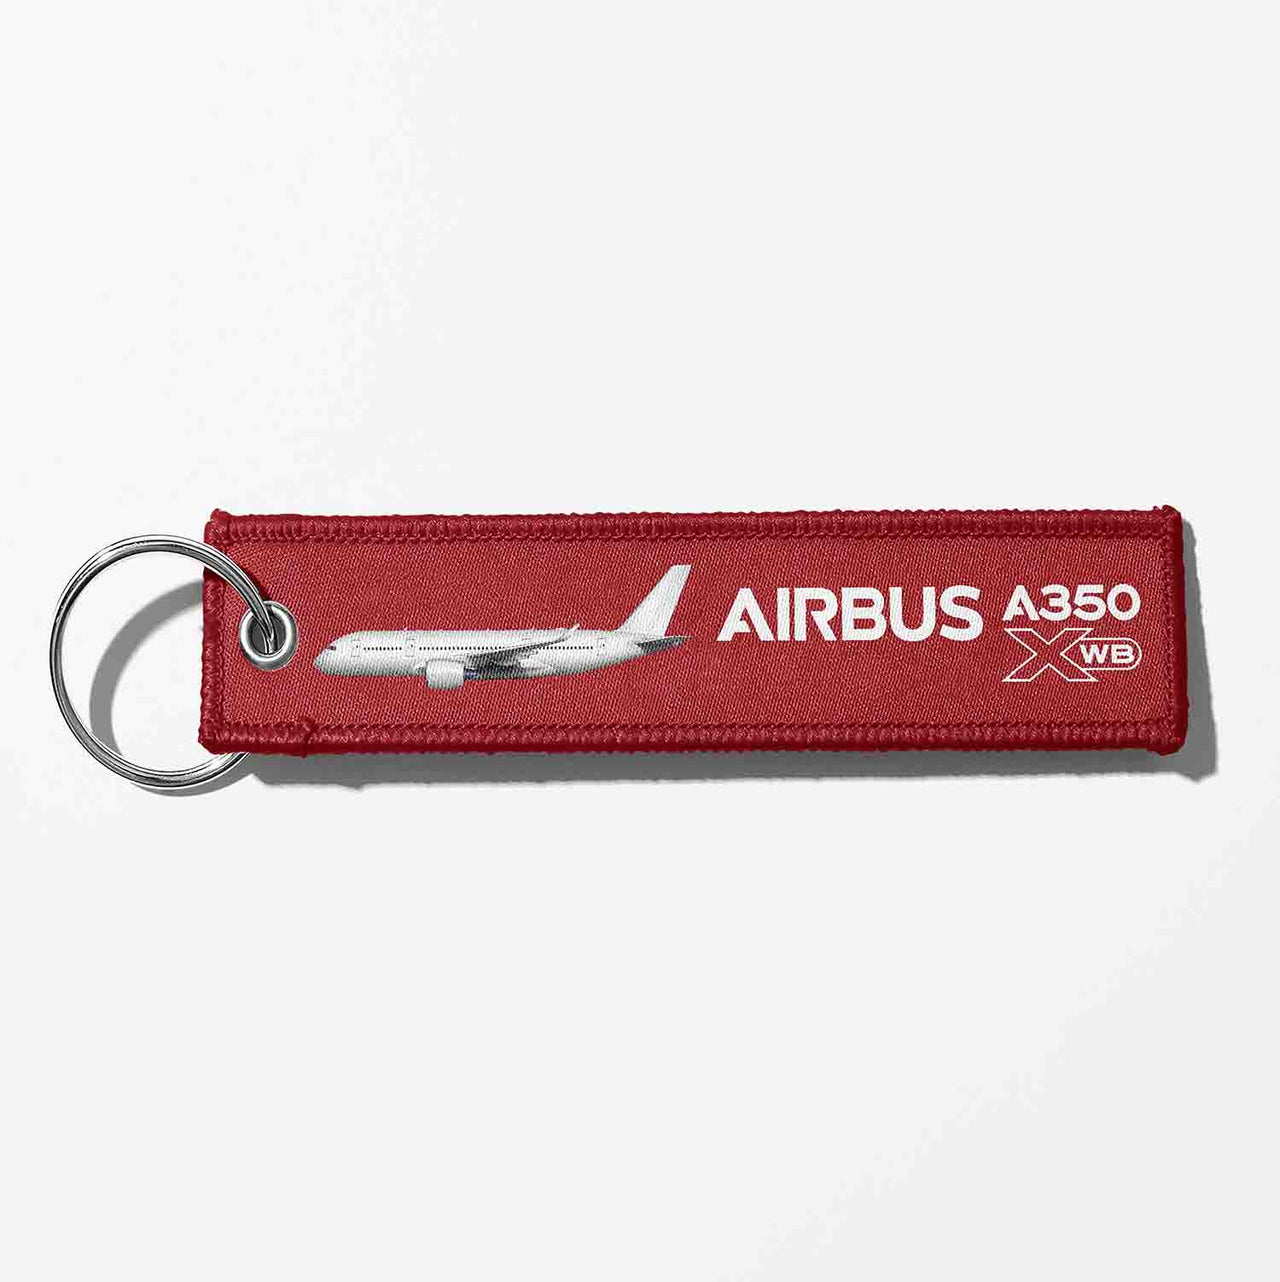 The Airbus A350 Designed Key Chains